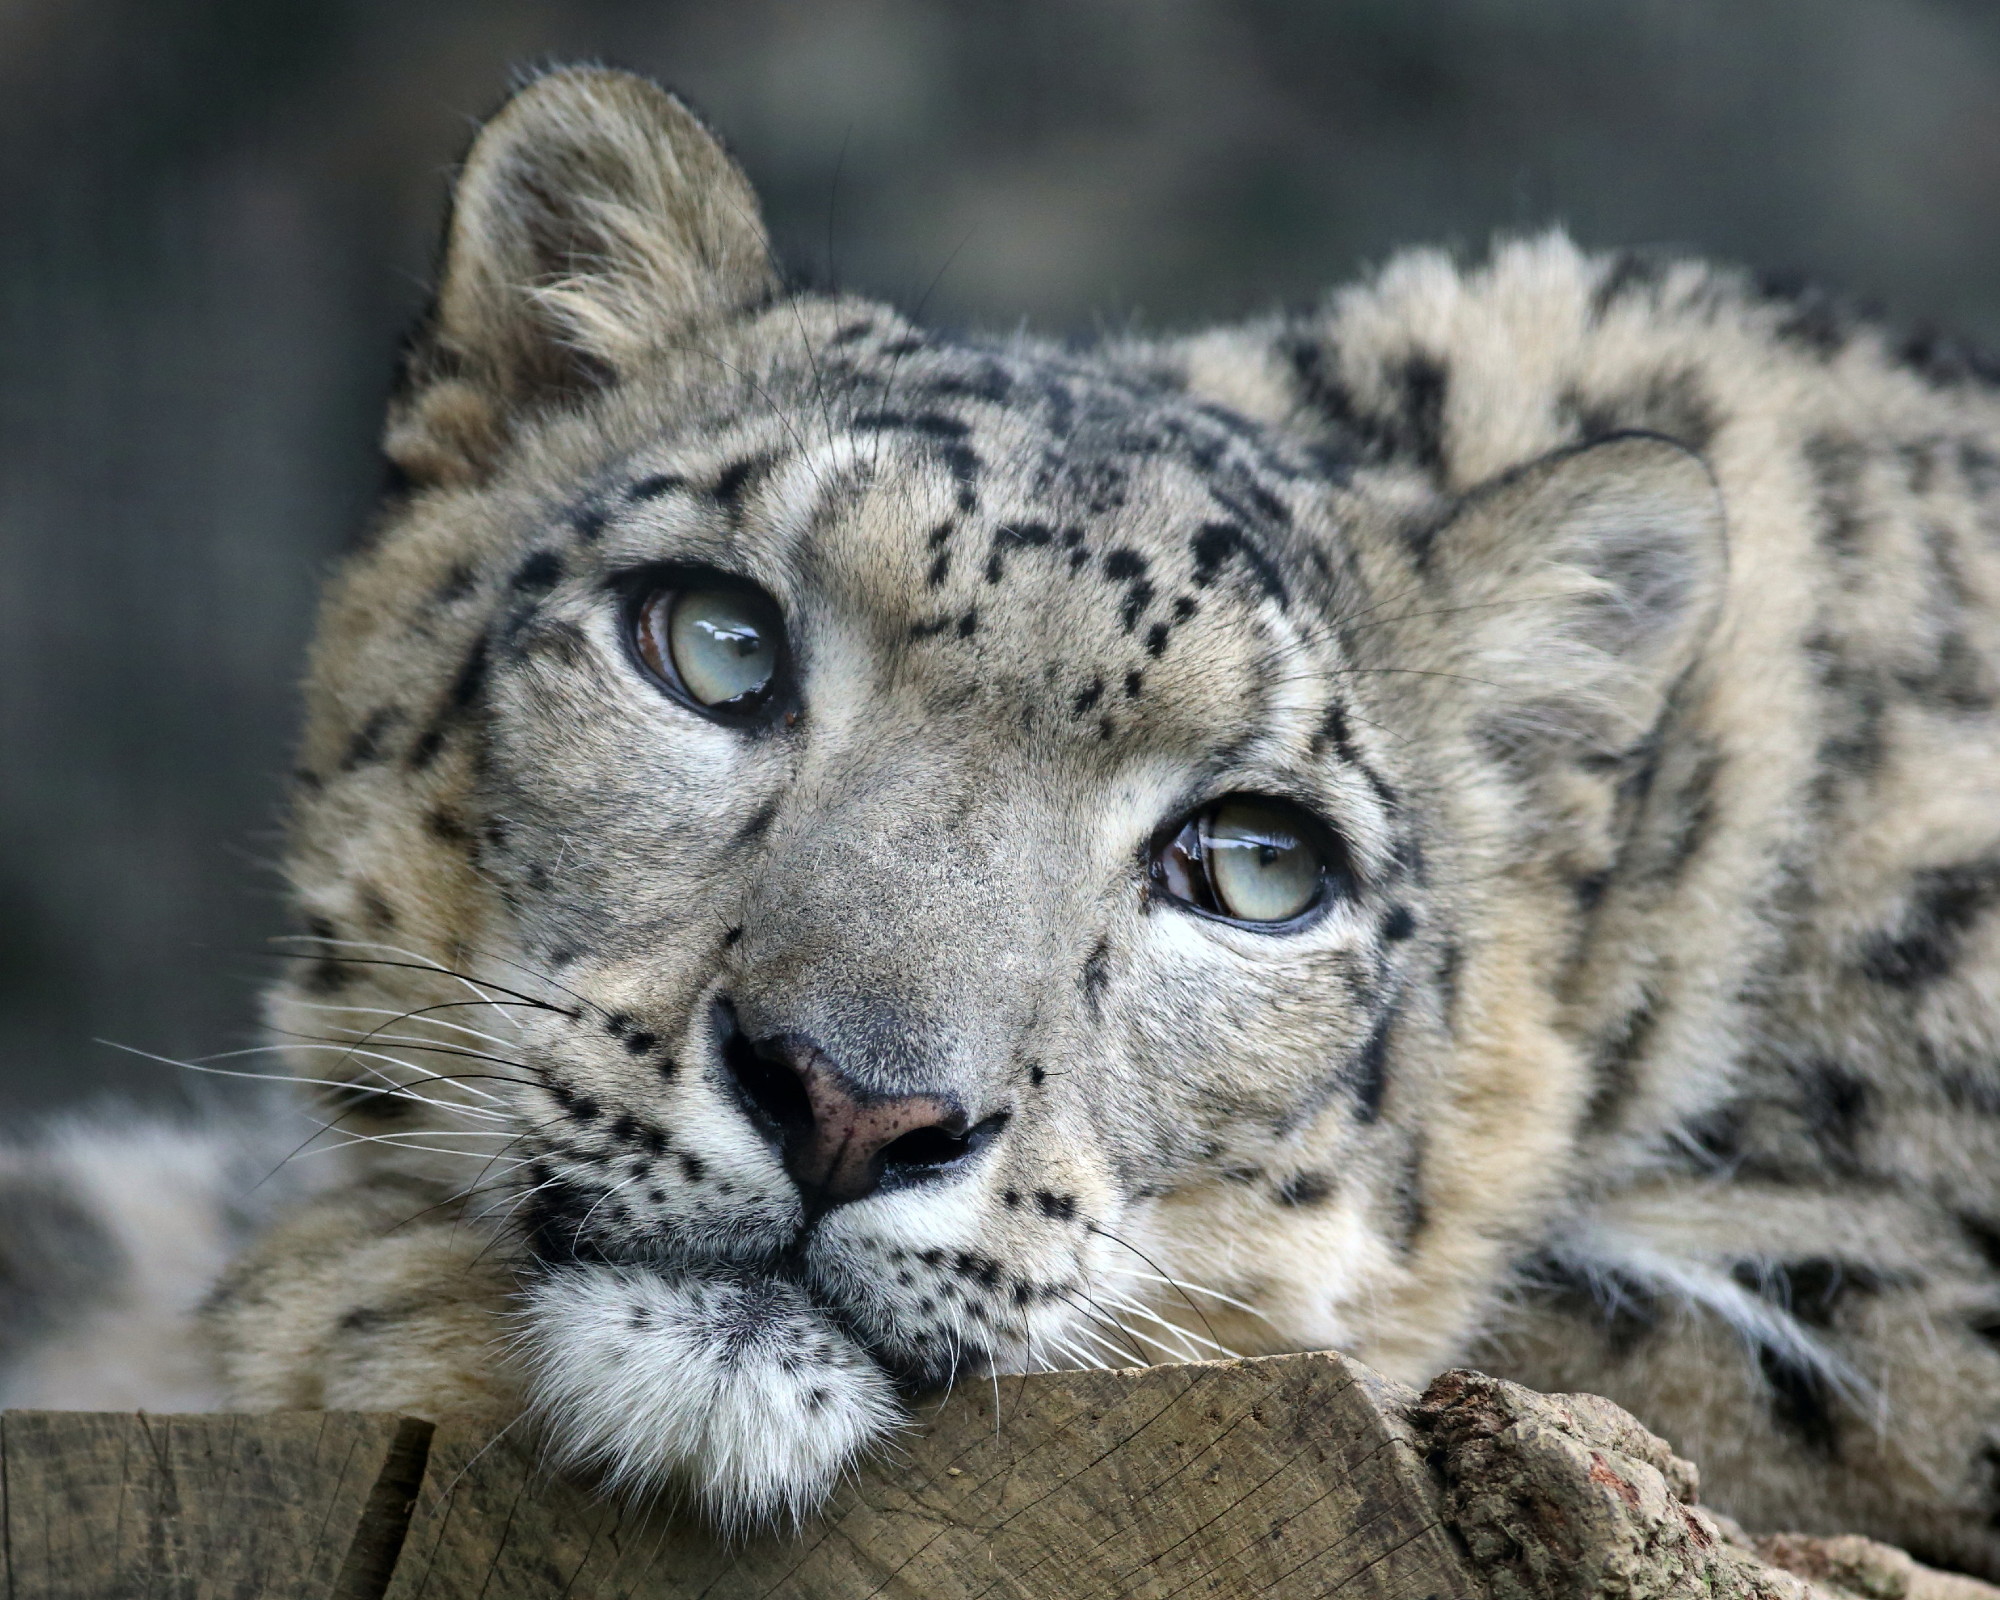 Snow Leopard Conservancy – Ensuring snow leopard survival and conserving  mountain landscapes by expanding environmental awareness and sharing  innovative practices through community stewardship and partnerships.